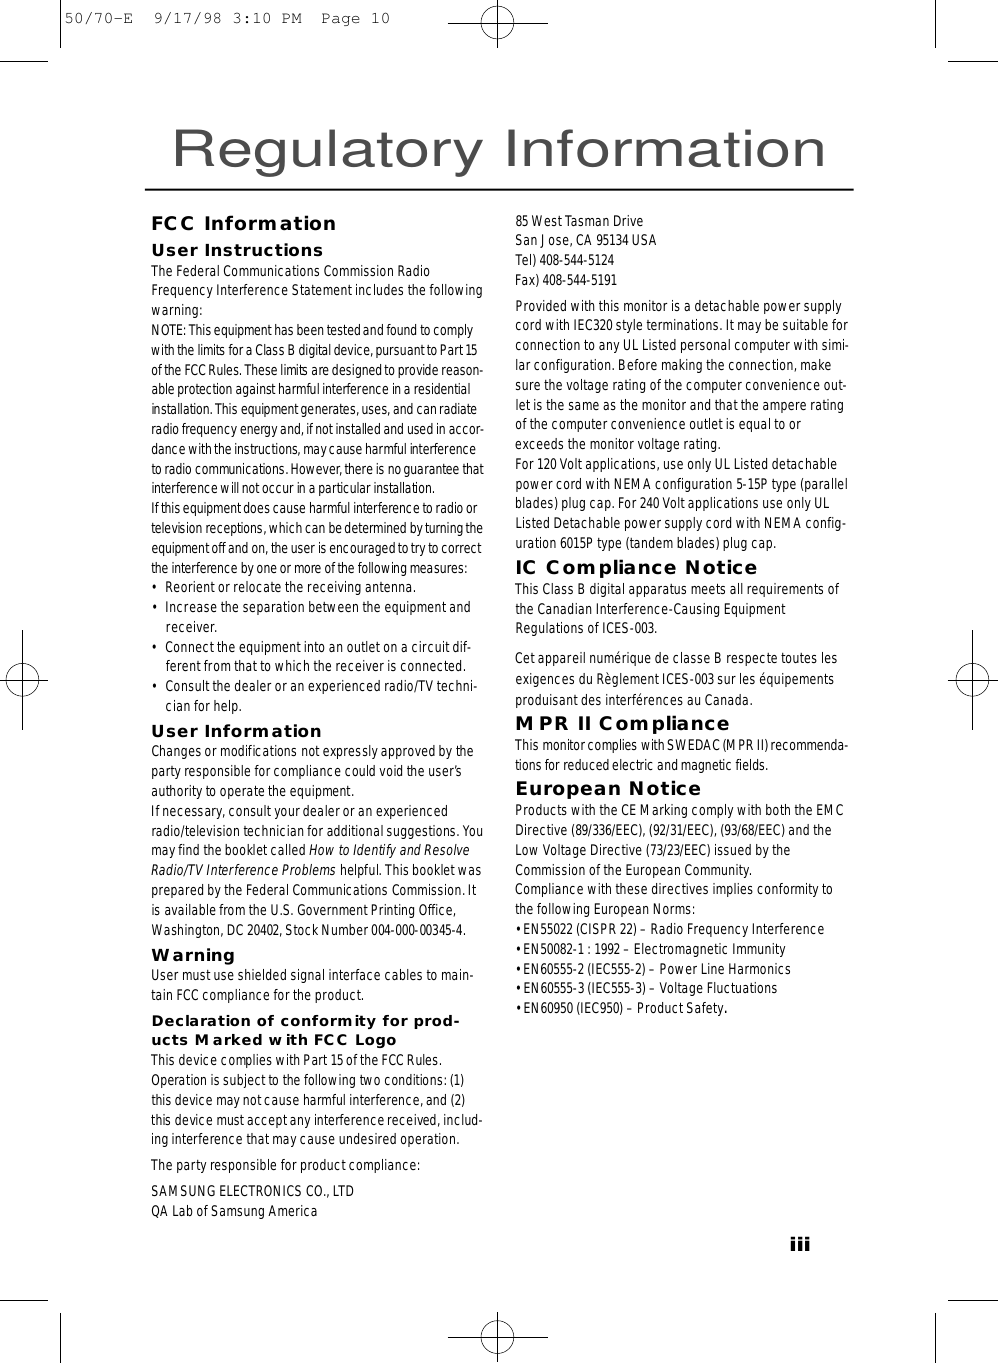 iiiFCC InformationUser InstructionsThe Federal Communications Commission RadioFrequency Interference Statement includes the followingwarning:NOTE: This equipment has been tested and found to complywith the limits for a Class B digital device, pursuant to Part 15of the FCCRules. These limits are designed to provide re a s o n-able protection against harmful interf e rence in a re s i d e n t i a linstallation. This equipment generates, uses, and can radiateradio frequency energy and, if not installed and used in accor-dance with the instructions, may cause harmful interf e re n c eto radio communications. However, there is no guarantee thati n t e rf e r ence will not occur in a particular installation.If this equipment does cause harmful interf e rence to radio ortelevision receptions, which can be determined by turning theequipment off and on, the user is encouraged to try to corre c tthe interf e rence by one or more of the following measure s :• Reorient or relocate the receiving antenna.• Increase the separation between the equipment andreceiver.• Connect the equipment into an outlet on a circuit dif-ferent from that to which the receiver is connected.• Consult the dealer or an experienced radio/TV techni-cian for help.User InformationChanges or modifications not expressly approved by thep a rty responsible for compliance could void the user’sauthority to operate the equipment.If necessary, consult your dealer or an experiencedradio/television technician for additional suggestions. Yo umay find the booklet called How to Identify and ResolveRadio/TV Interf e rence Pro b l e m s helpful. This booklet wasp re p a red by the Federal Communications Commission. Itis available from the U.S. Government Printing Off i c e ,Washington, DC 20402, Stock Number 004-000-00345-4.WarningUser must use shielded signal interface cables to main-tain FCC compliance for the product.Declaration of conformity for prod-ucts Marked with FCC LogoThis device complies with Part 15 of the FCC Rules.Operation is subject to the following two conditions: (1)this device may not cause harmful interf e rence, and (2)this device must accept any interf e rence received, includ-ing interference that may cause undesired operation.The party responsible for product compliance:SAMSUNG ELECTRONICS CO., LTDQA Lab of Samsung America85 West Tasman Drive San Jose, CA 95134 USATel) 408-544-5124Fax) 408-544-5191Provided with this monitor is a detachable power supplycord with IEC320 style terminations. It may be suitable forconnection to any UL Listed personal computer with simi-lar configuration. Before making the connection, makesure the voltage rating of the computer convenience out-let is the same as the monitor and that the ampere ratingof the computer convenience outlet is equal to orexceeds the monitor voltage rating. For 120 Volt applications, use only UL Listed detachablepower cord with NEMA configuration 5-15P type (parallelblades) plug cap. For 240 Volt applications use only ULListed Detachable power supply cord with NEMA config-uration 6015P type (tandem blades) plug cap.IC Compliance NoticeThis Class B digital apparatus meets all requirements ofthe Canadian Interference-Causing EquipmentRegulations of ICES-003.Cet appareil numérique de classe B respecte toutes lesexigences du Règlement ICES-003 sur les équipementsproduisant des interférences au Canada.MPR II ComplianceThis monitor complies with SWEDAC (MPR II) re c o m m e n d a -tions for reduced electric and magnetic fields.European NoticeProducts with the CE Marking comply with both the EMCDirective (89/336/EEC), (92/31/EEC), (93/68/EEC) and theLow Voltage Directive (73/23/EEC) issued by theCommission of the European Community.Compliance with these directives implies conformity tothe following European Norms:• EN55022 (CISPR 22) – Radio Frequency Interference• EN50082-1 : 1992 – Electromagnetic Immunity• EN60555-2 (IEC555-2) – Power Line Harmonics• EN60555-3 (IEC555-3) – Voltage Fluctuations• EN60950 (IEC950) – Product Safety.Regulatory Information50/70-E  9/17/98 3:10 PM  Page 10